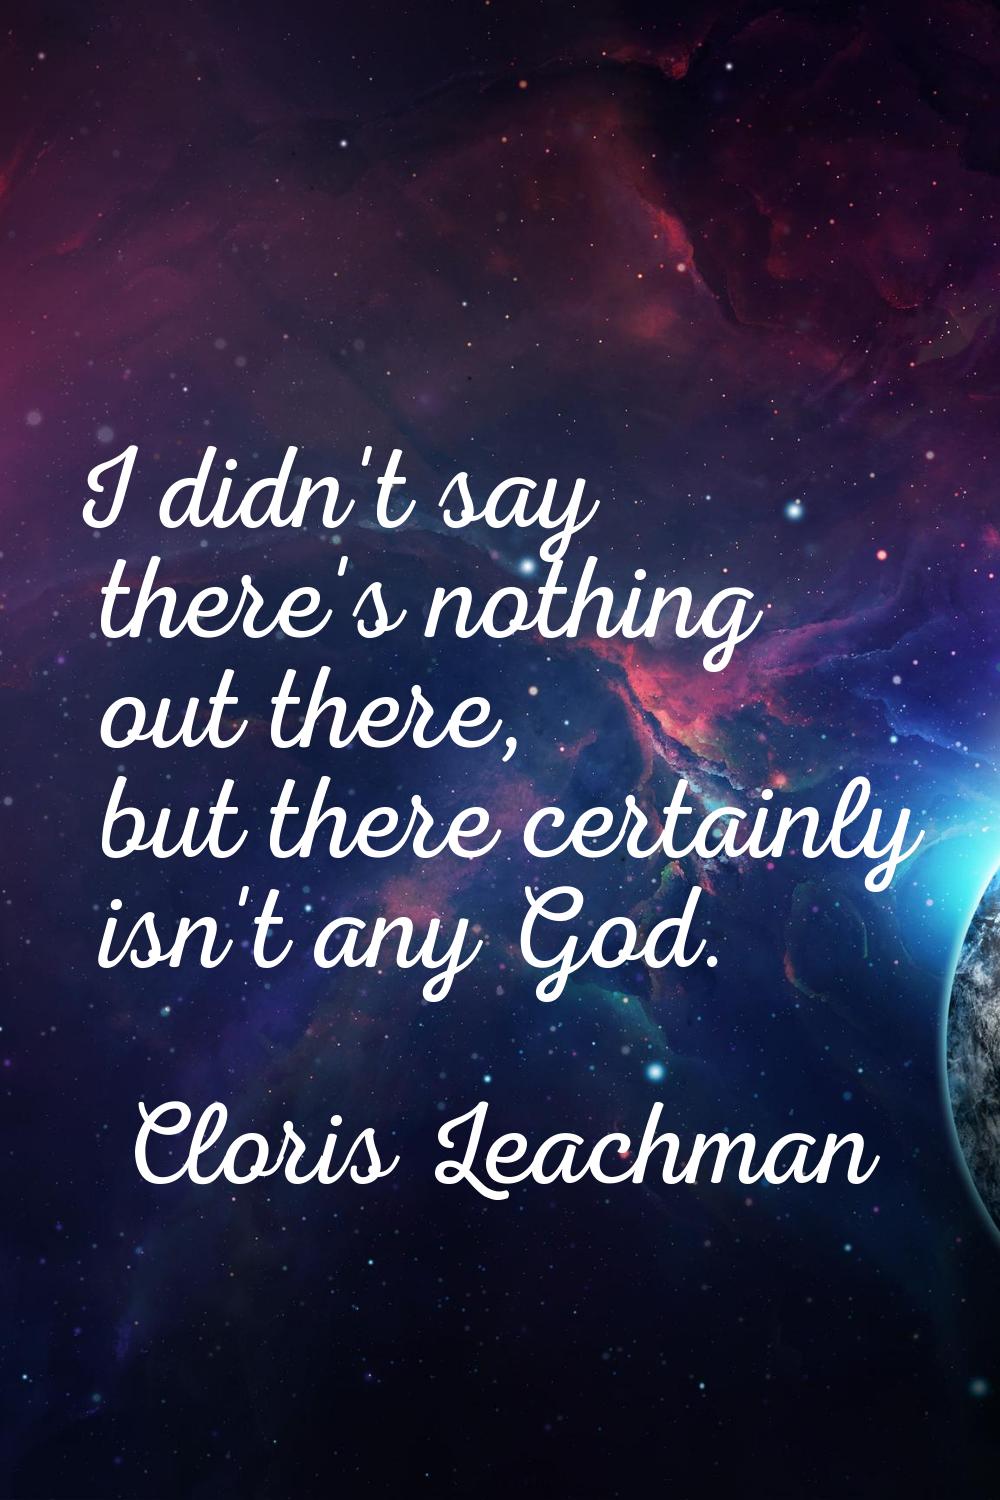 I didn't say there's nothing out there, but there certainly isn't any God.